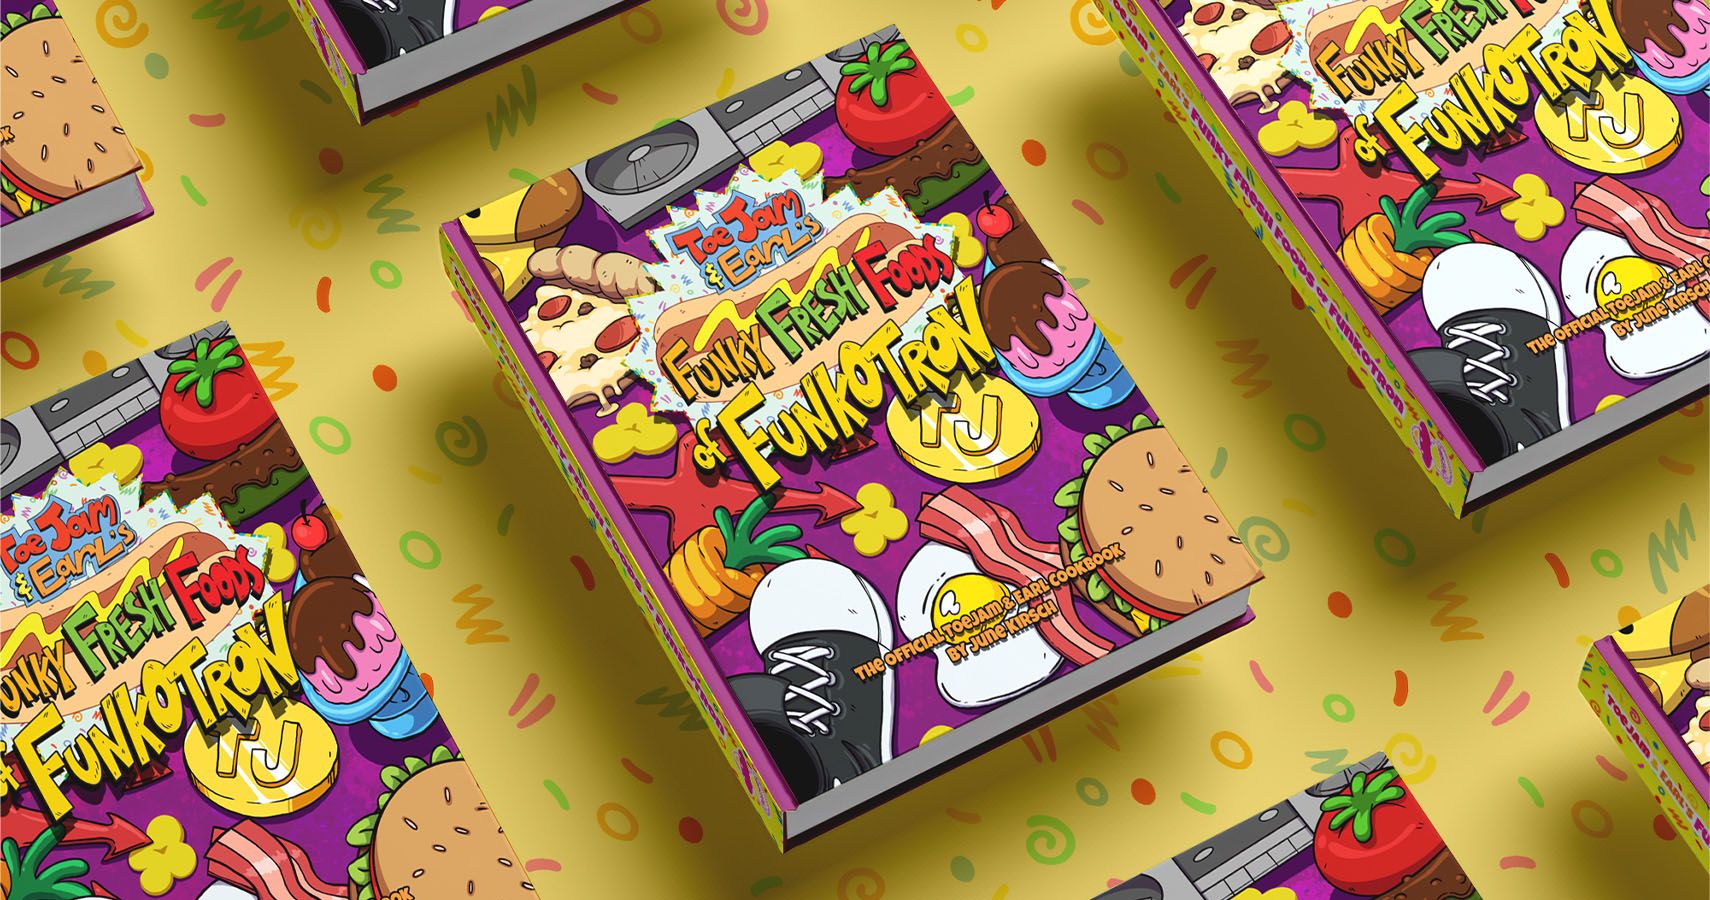 A mockup of the ToeJam & Earl book cover in a repeating pattern.